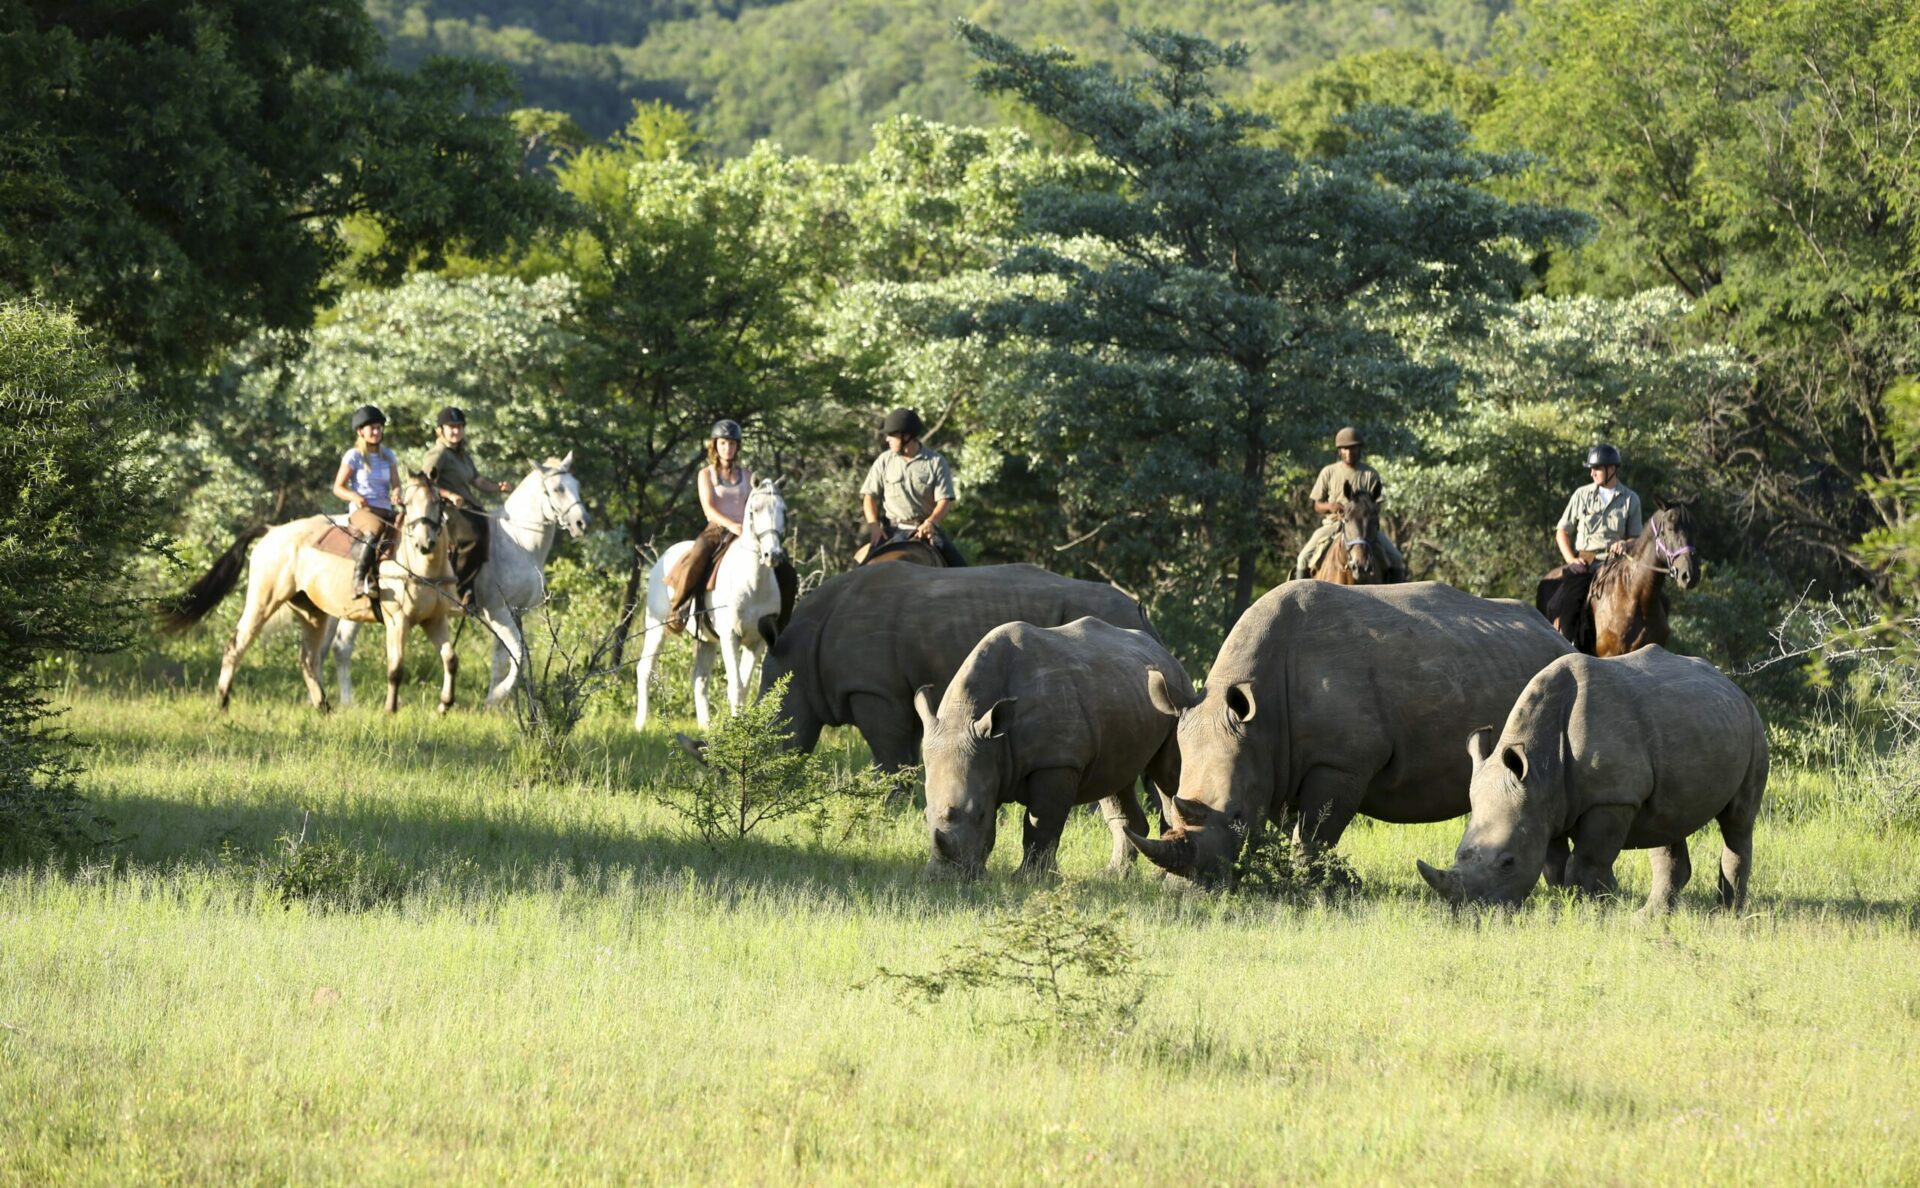 horseback riders stopping to look at rhino in the open grass